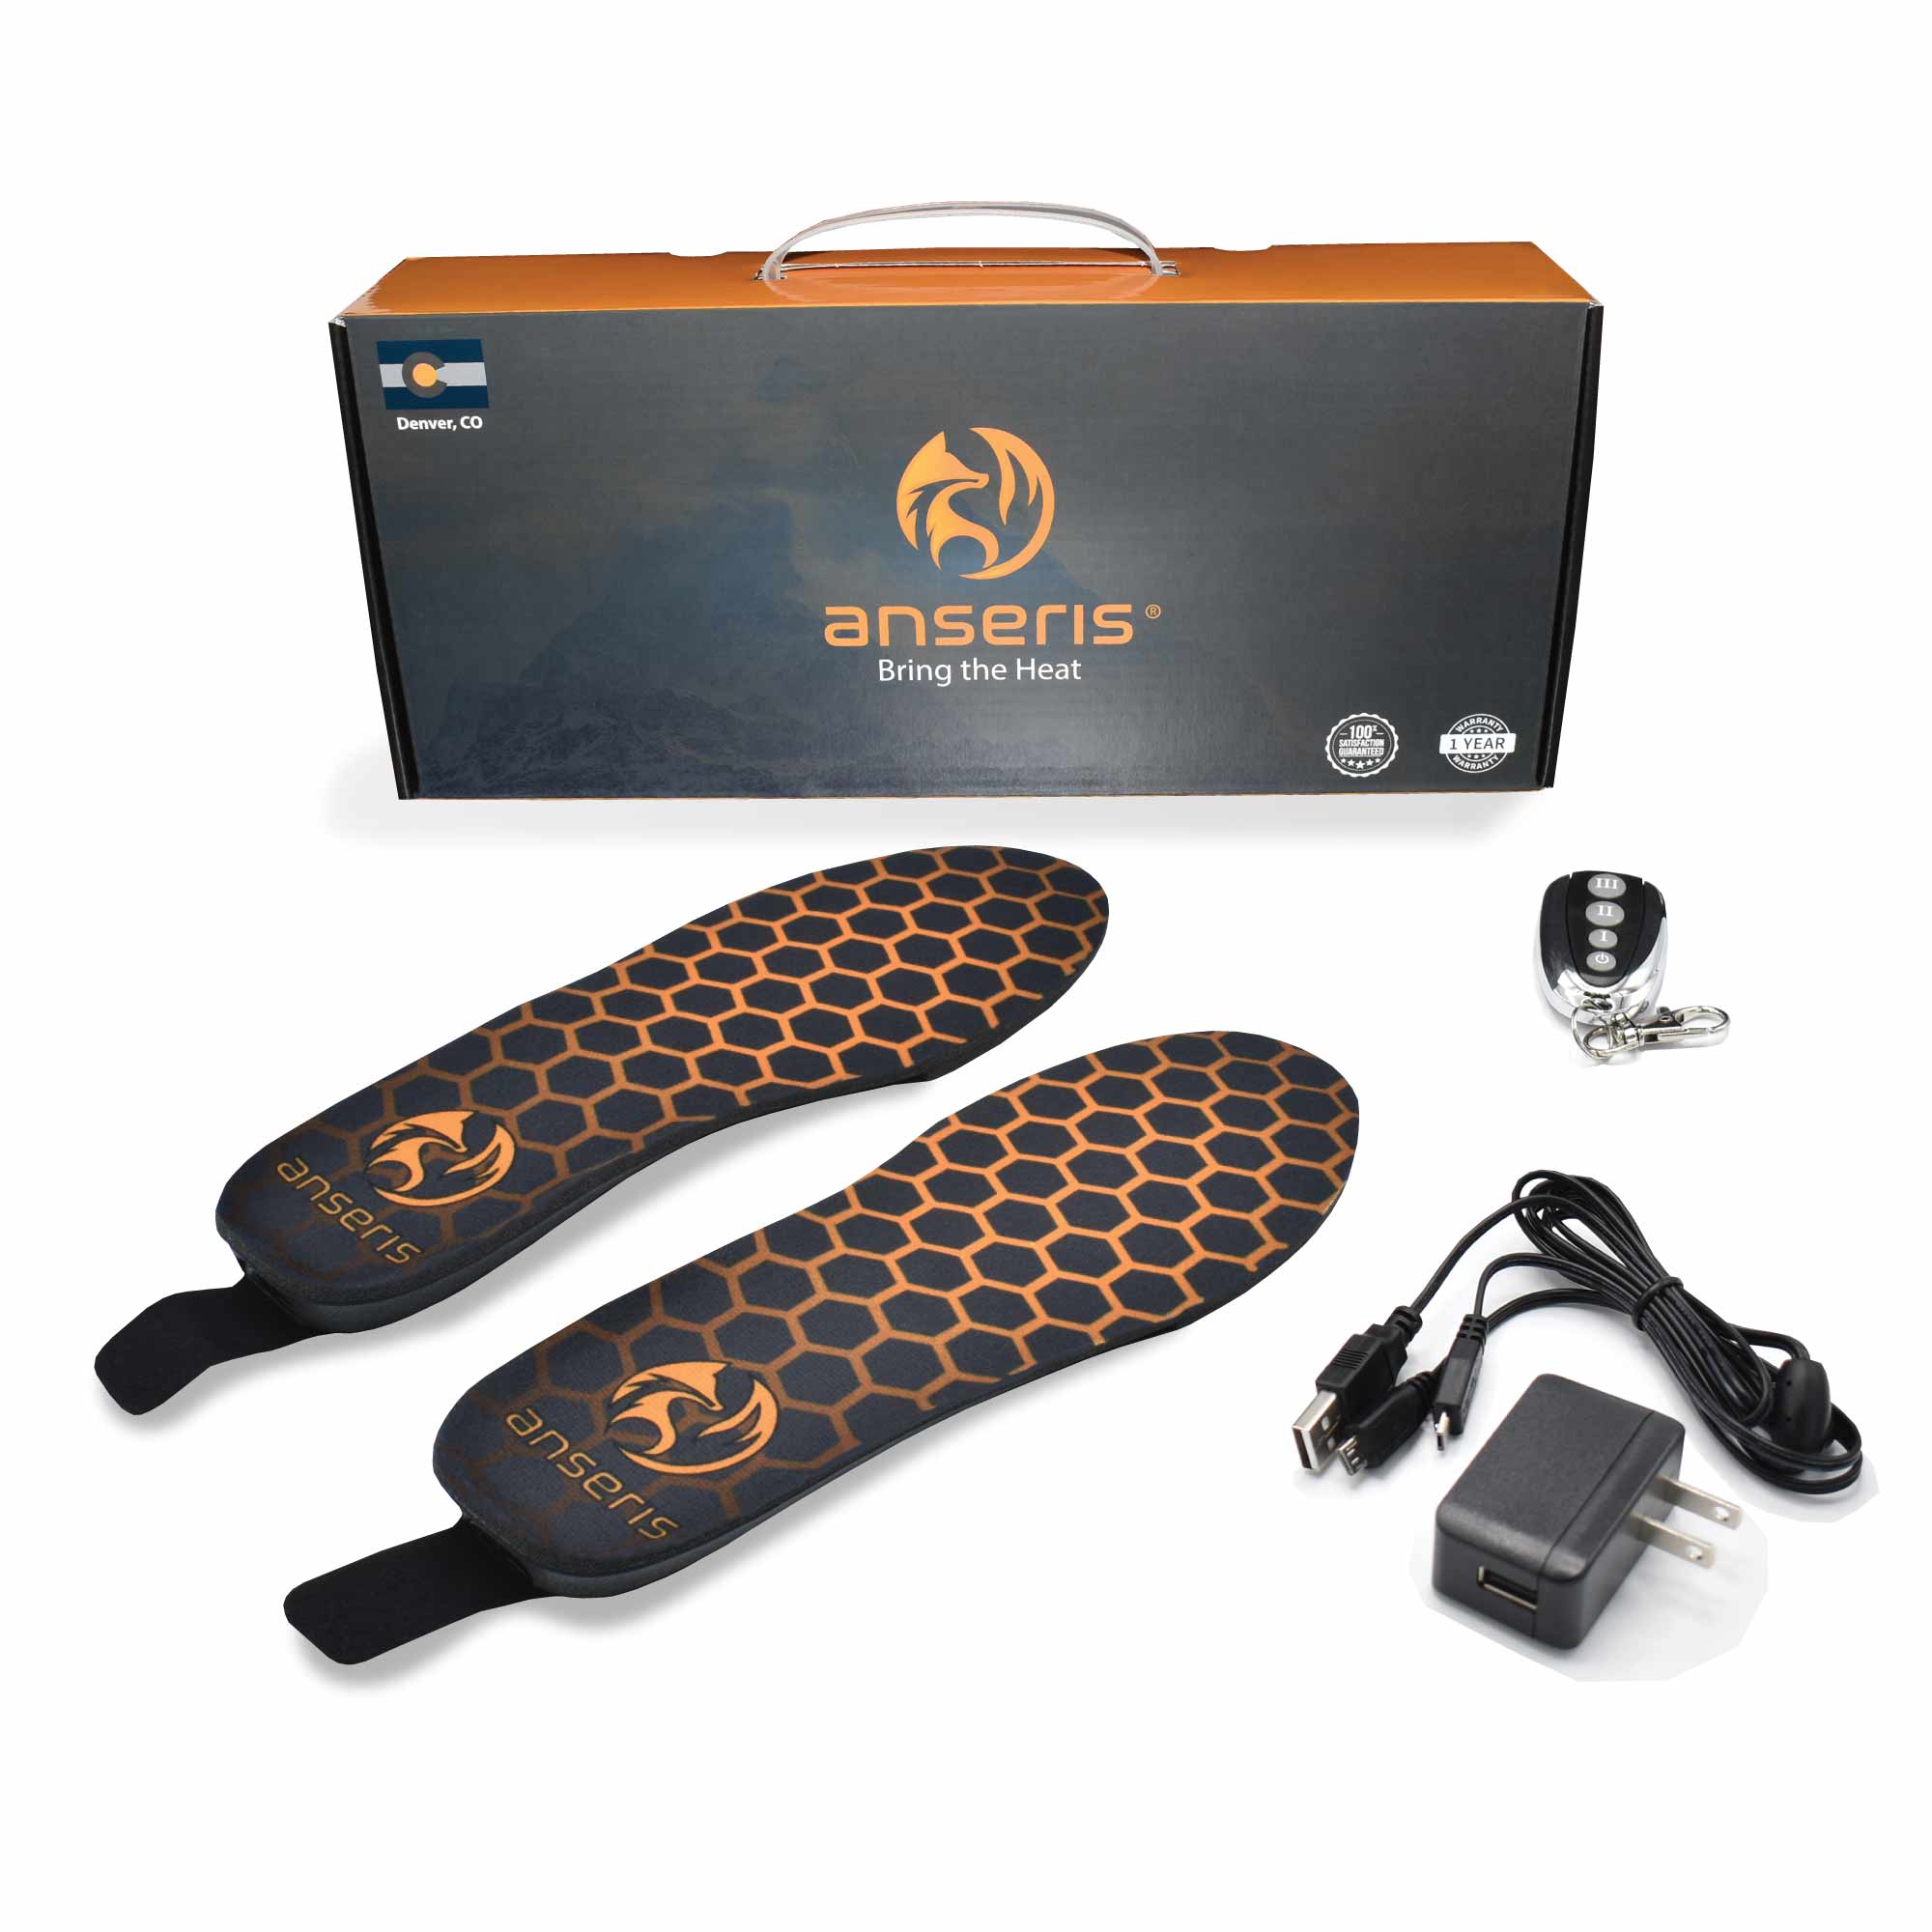 the outrek 2 heated insoles by anseris heated clothing come with one pair of heated insoles, each with a built in battery, one dual charger to charge both batteries at the same time and remote control to adjust the heat setting 